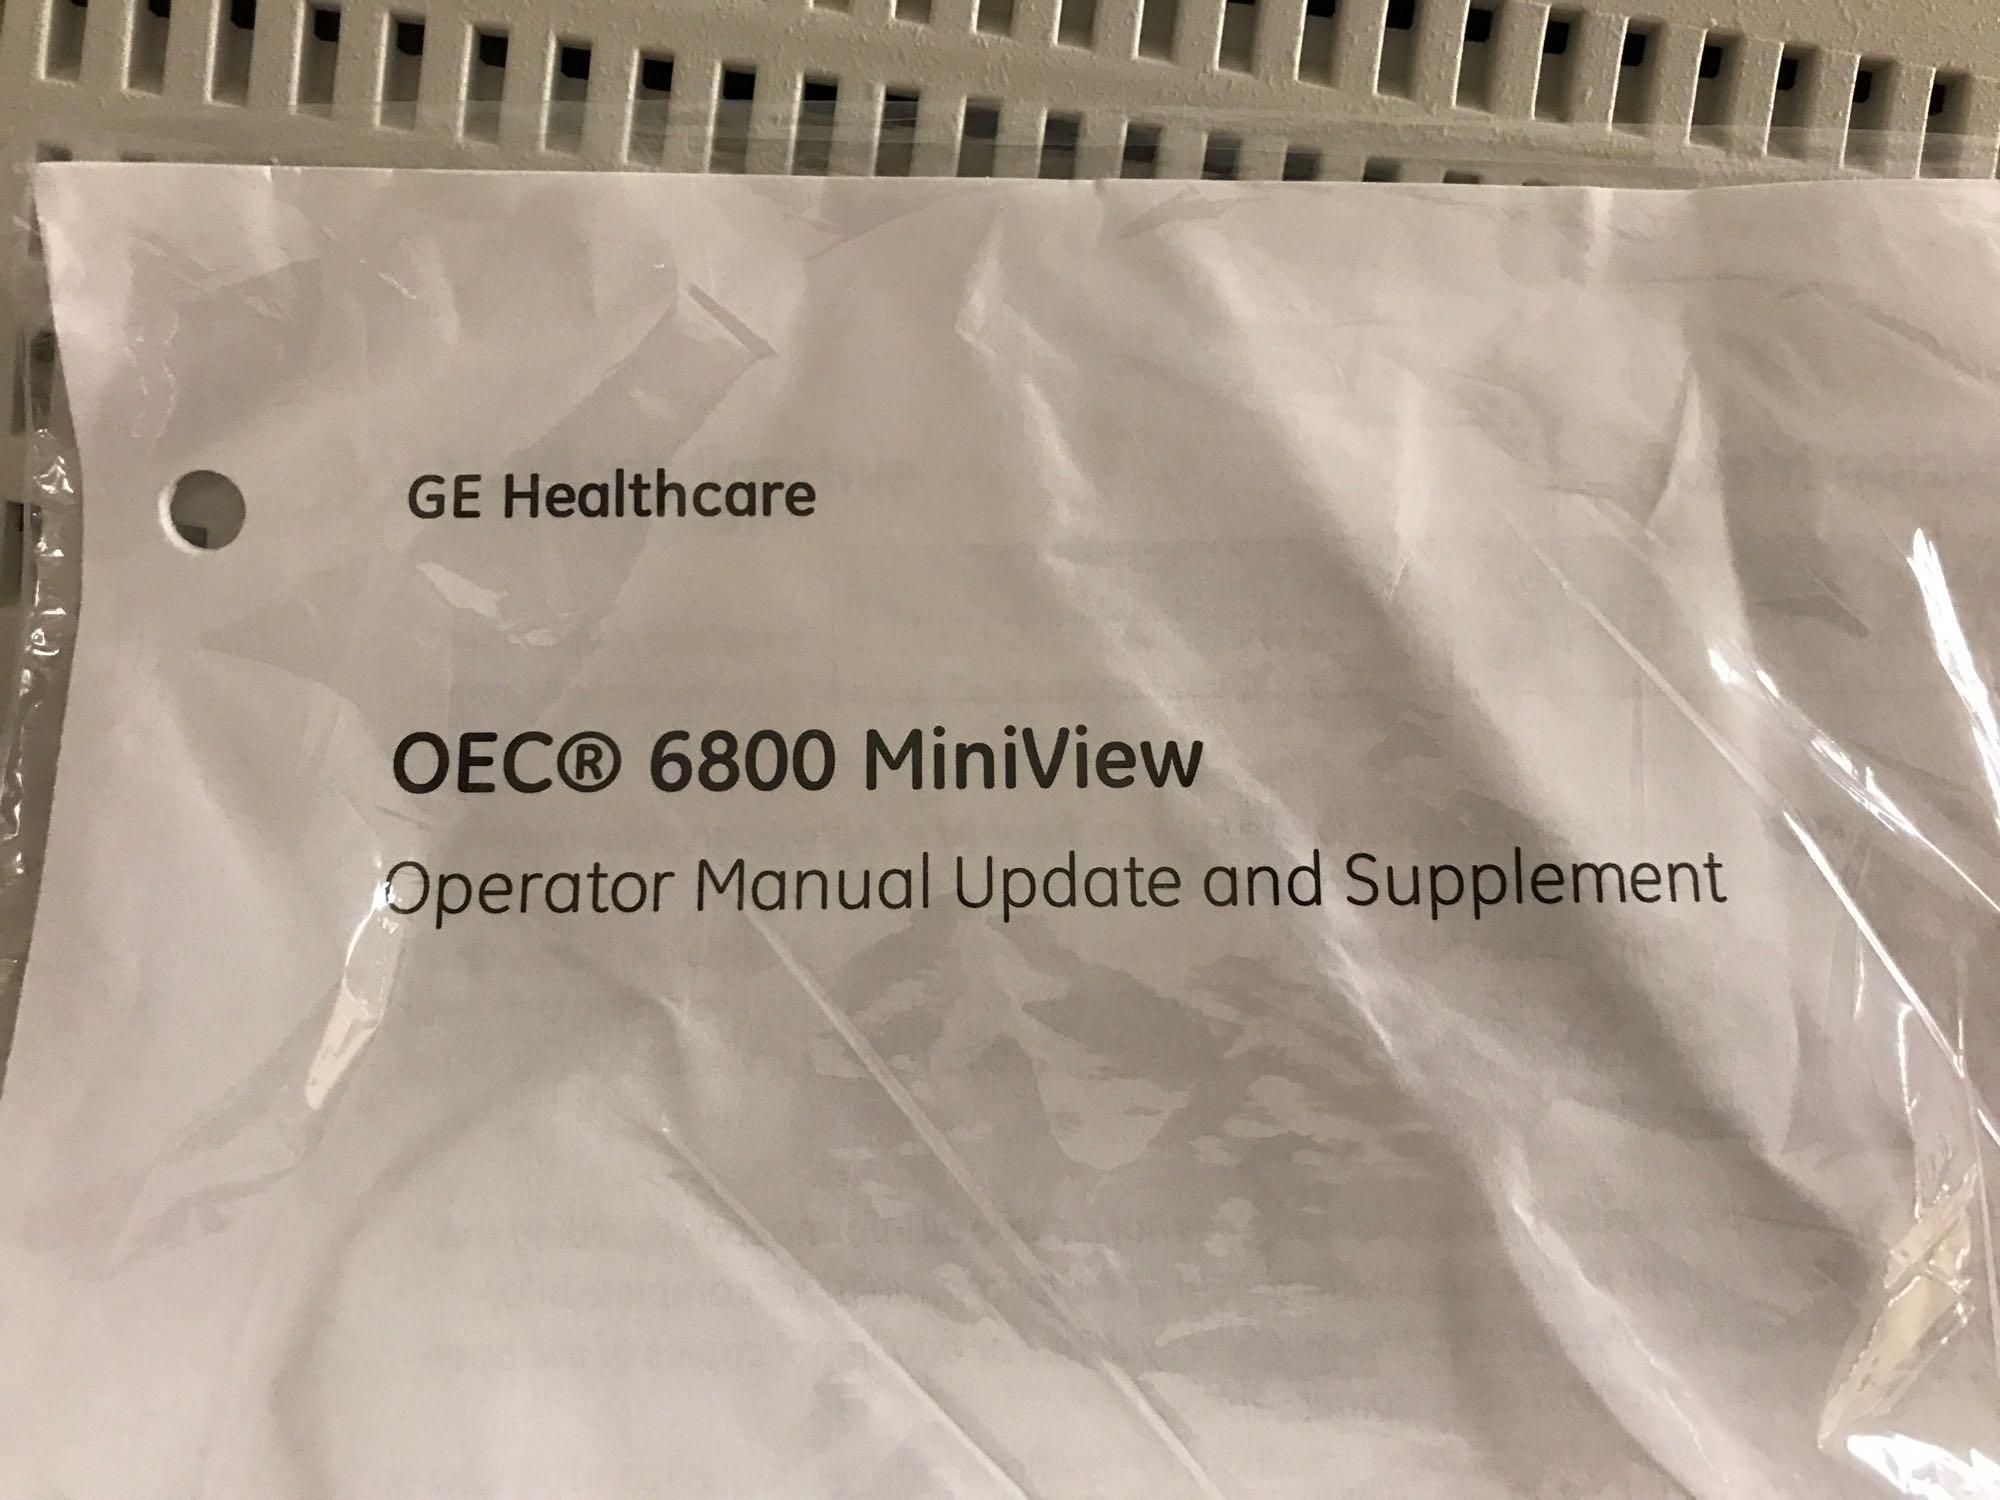 MiniView 6800 Mobile Imaging System